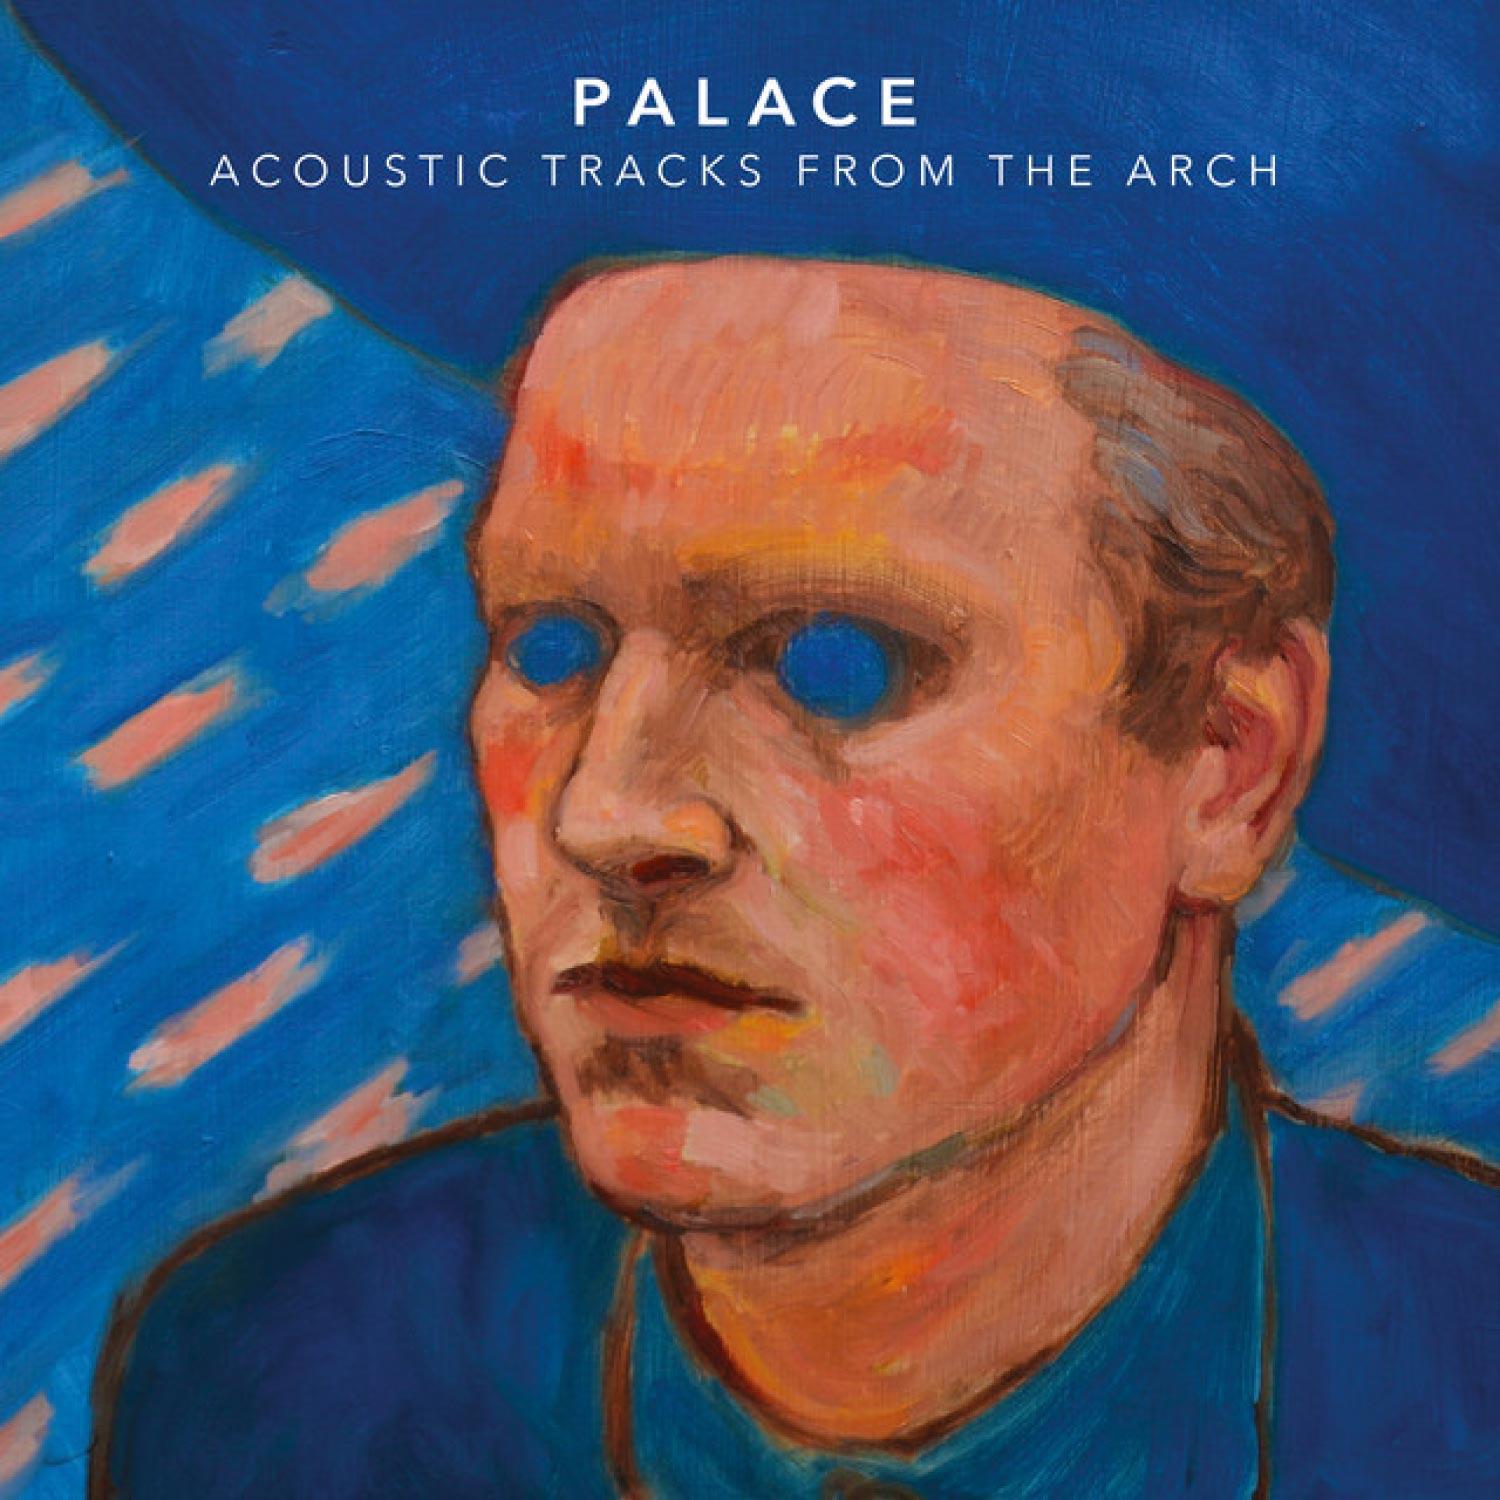 Acoustic Tracks from the Arch by Palace